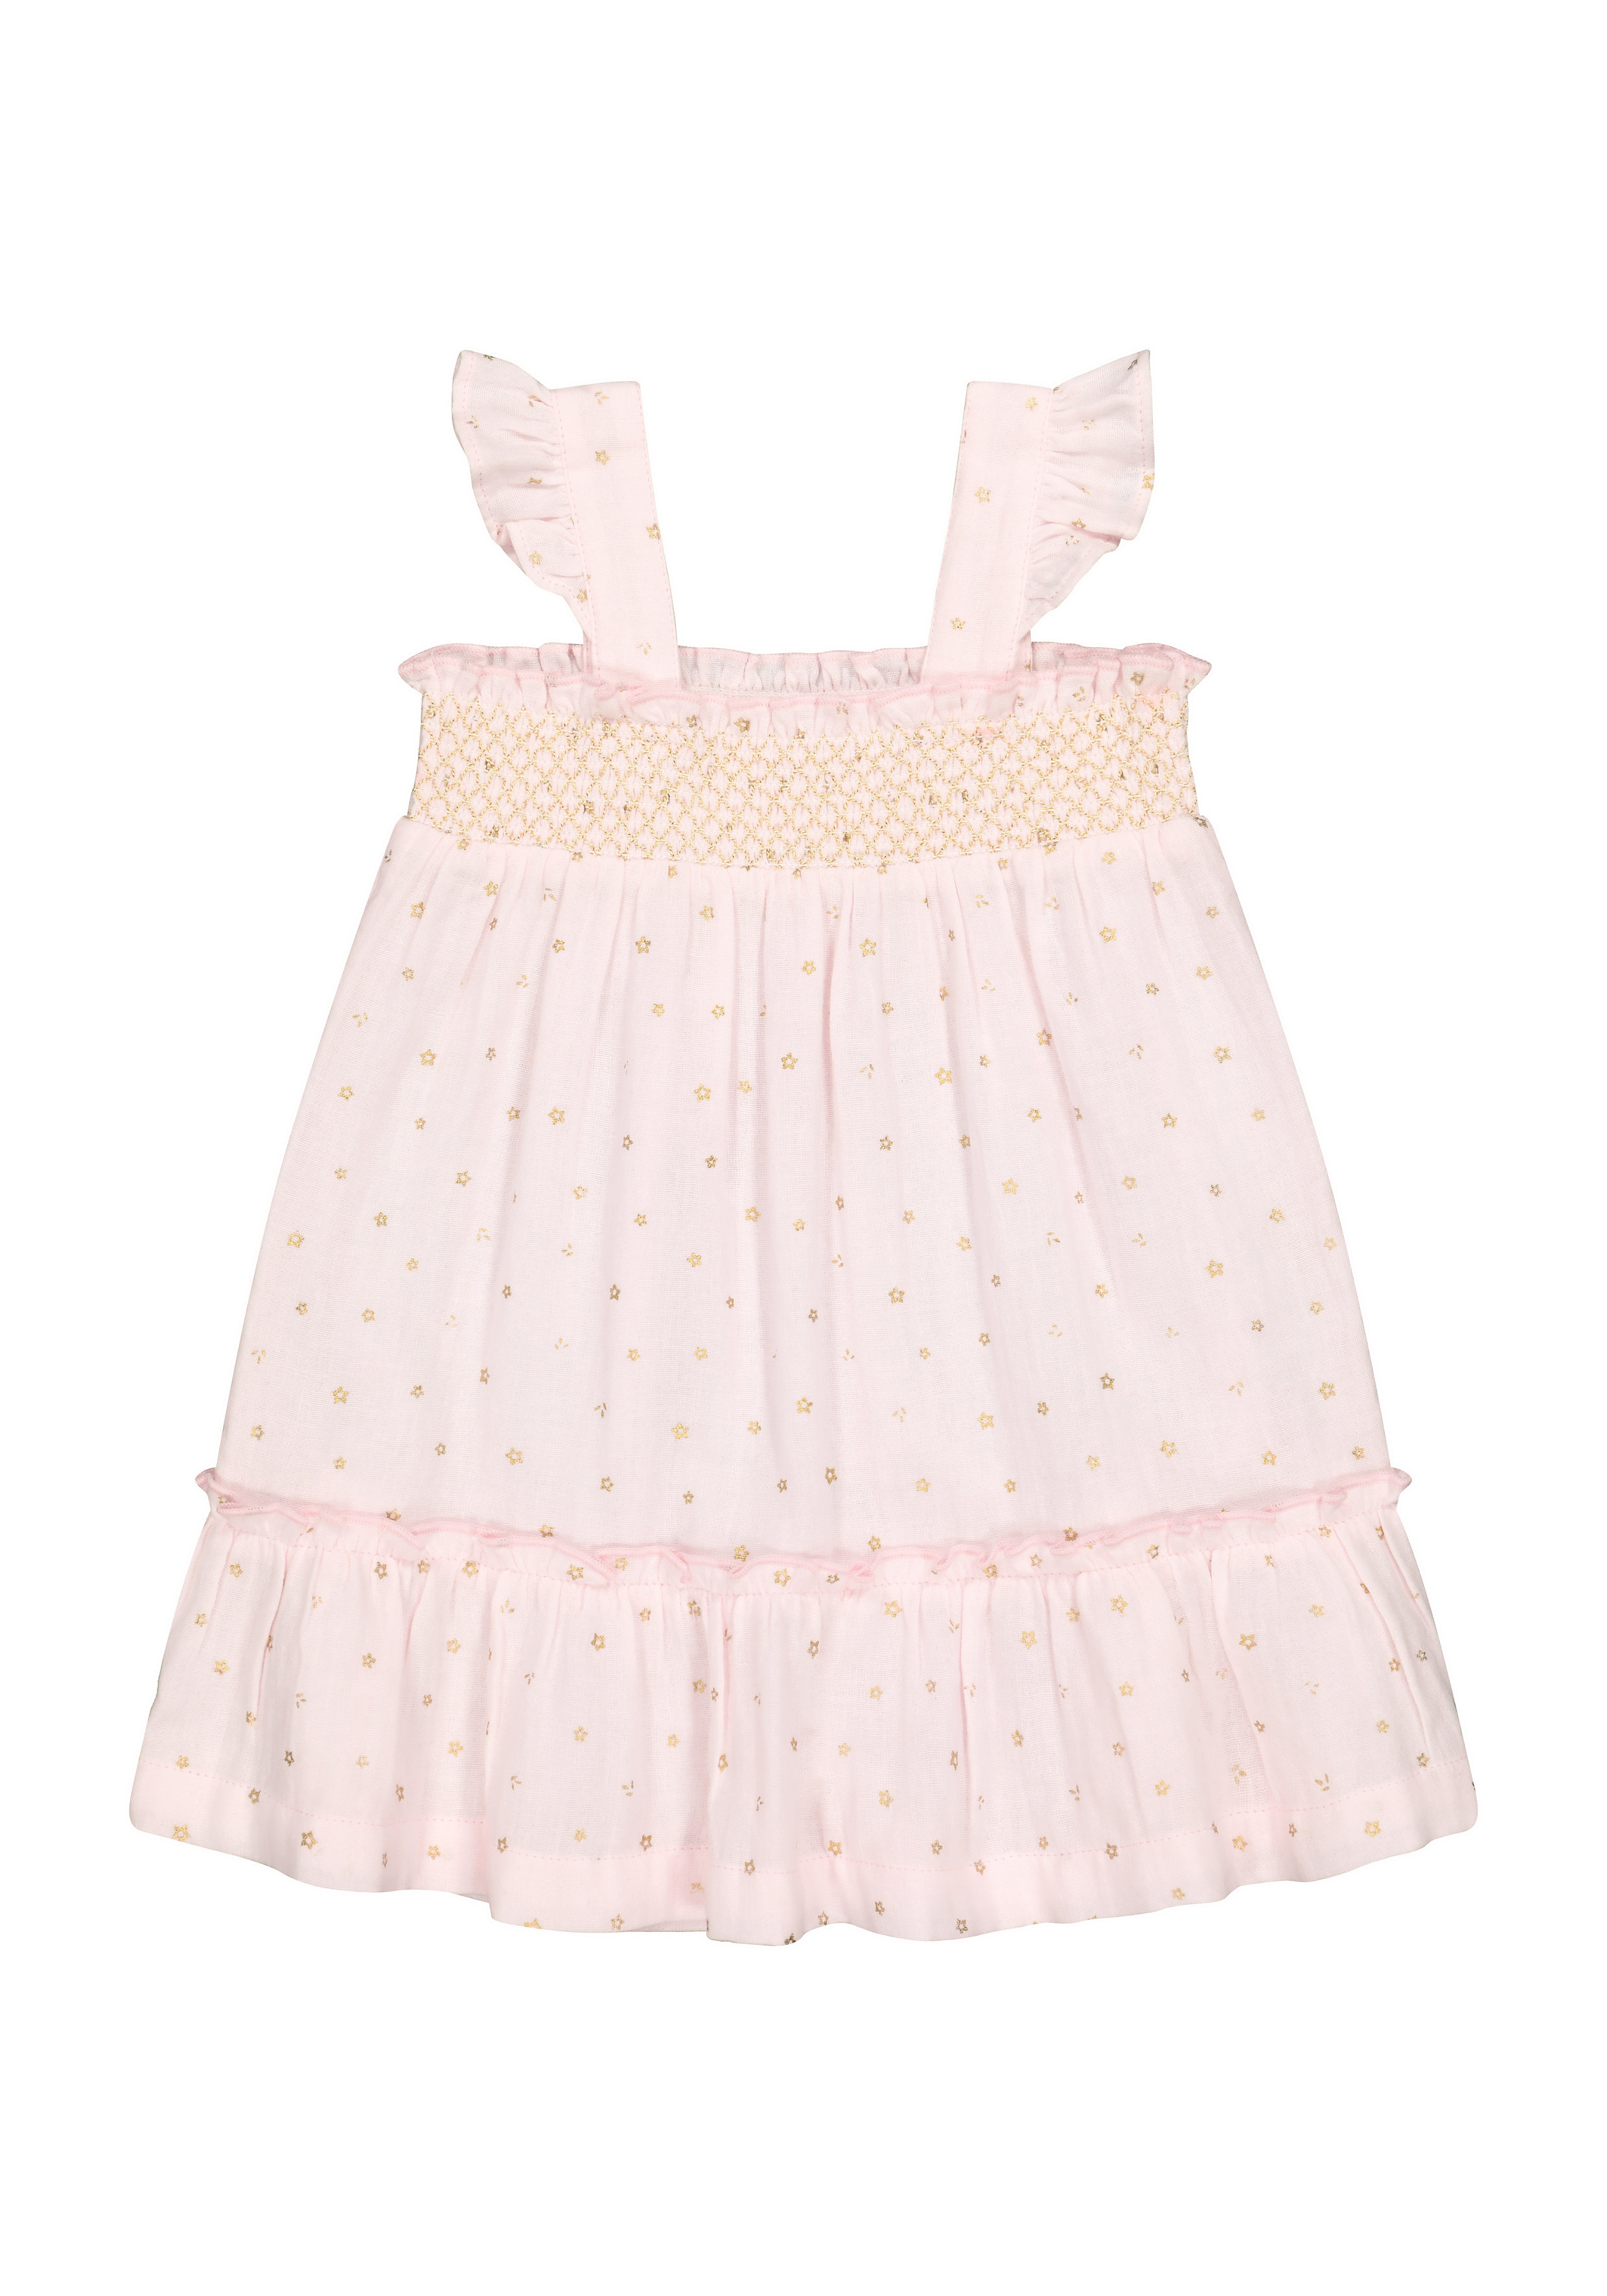 Mothercare | Girls Sleeveless Embroidered Dress - Pink